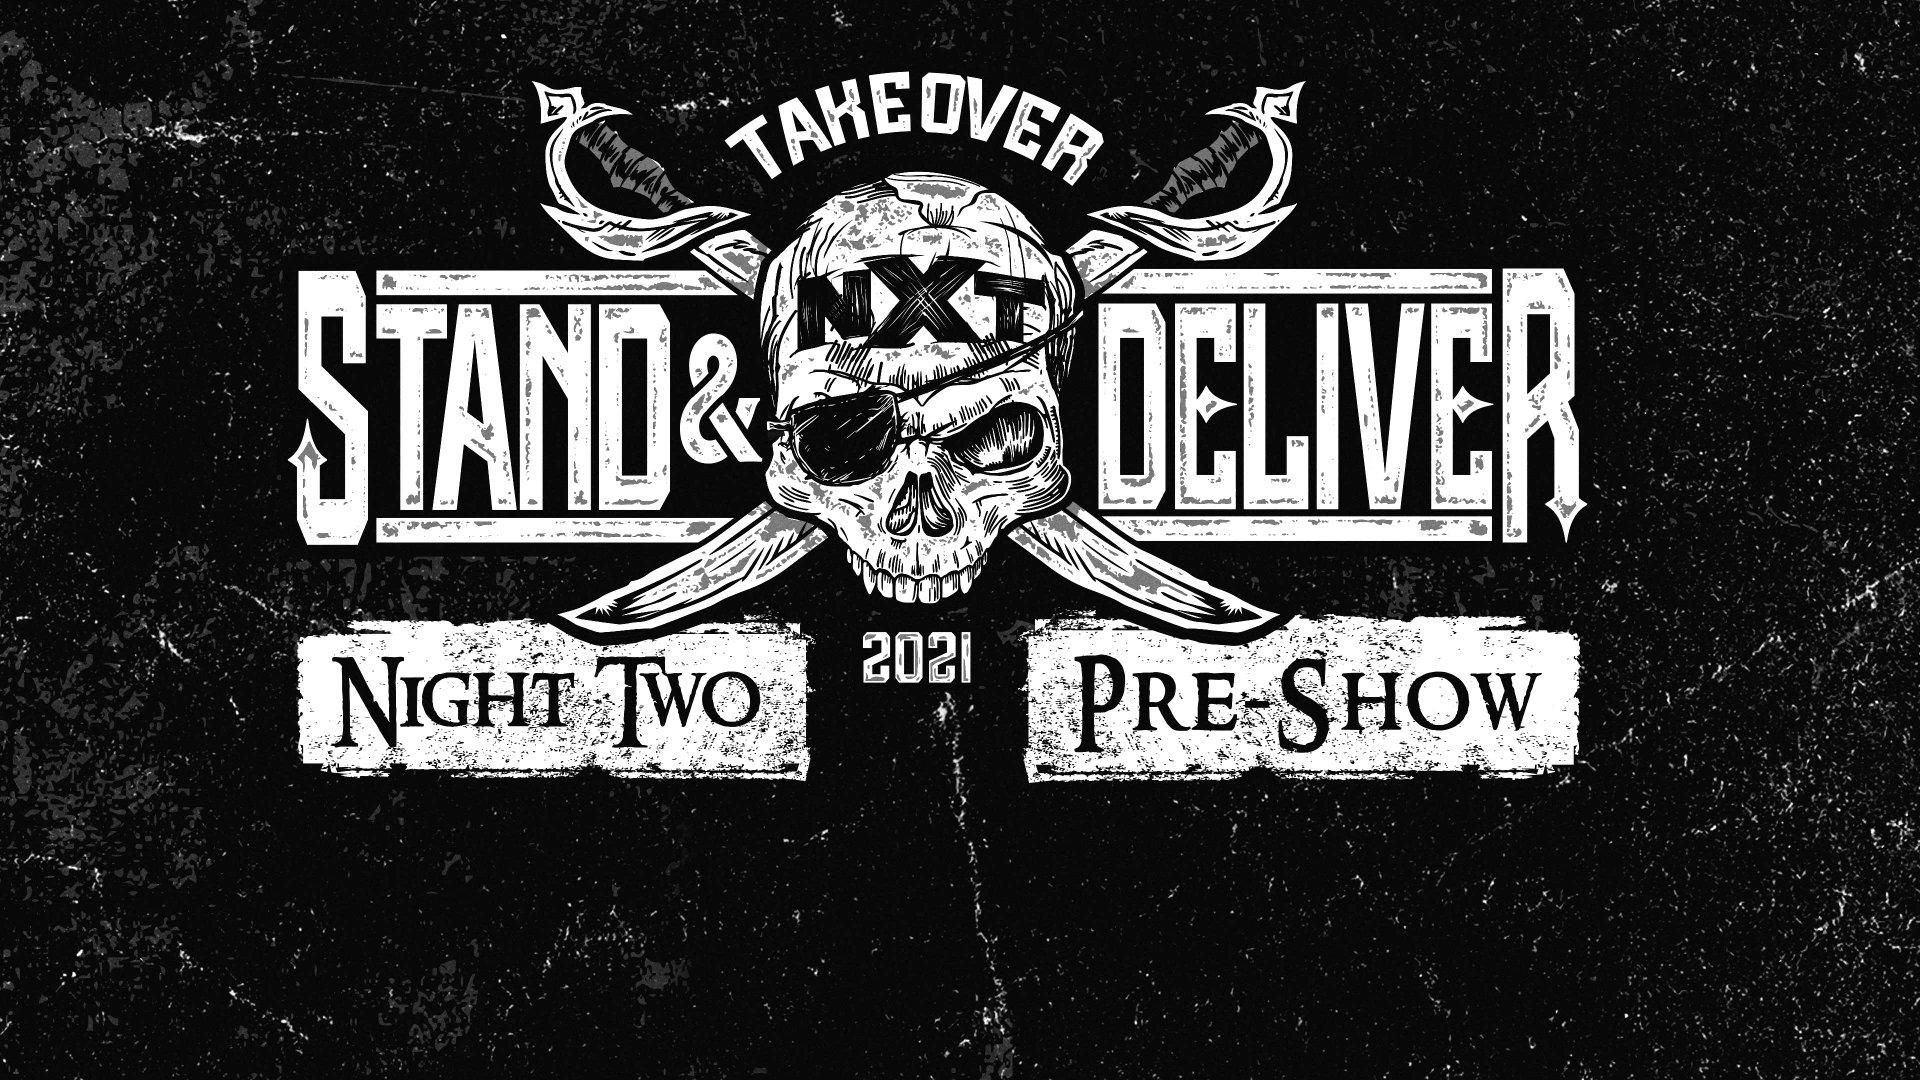 WWE NXT TakeOver: Stand & Deliver 2021 Pre-Show (Night 2)